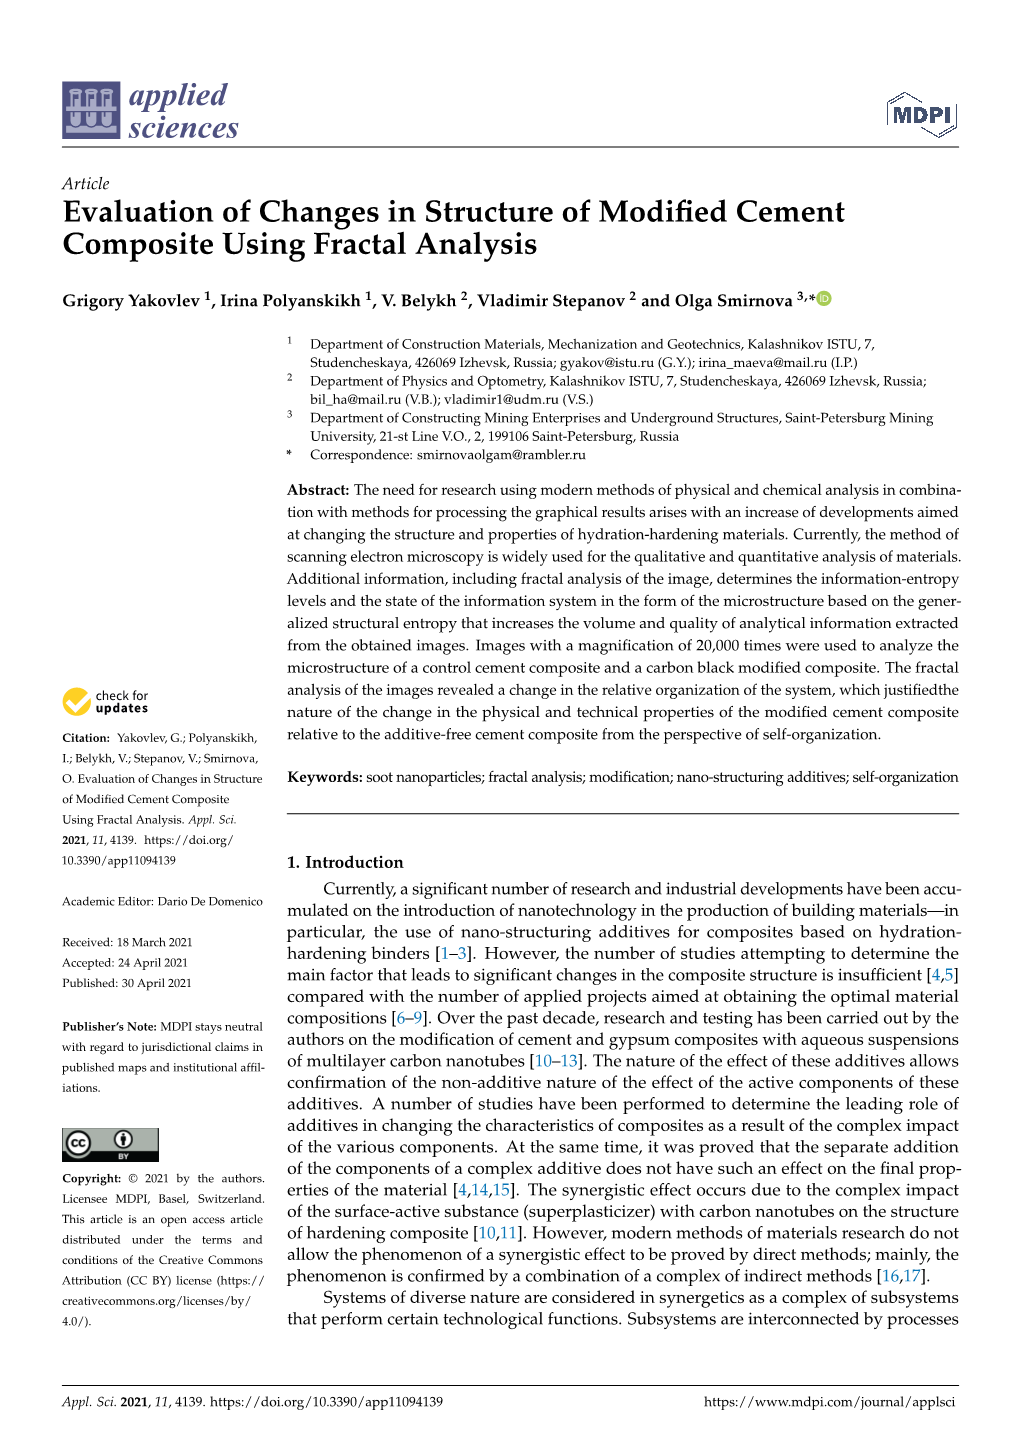 Evaluation of Changes in Structure of Modified Cement Composite Using